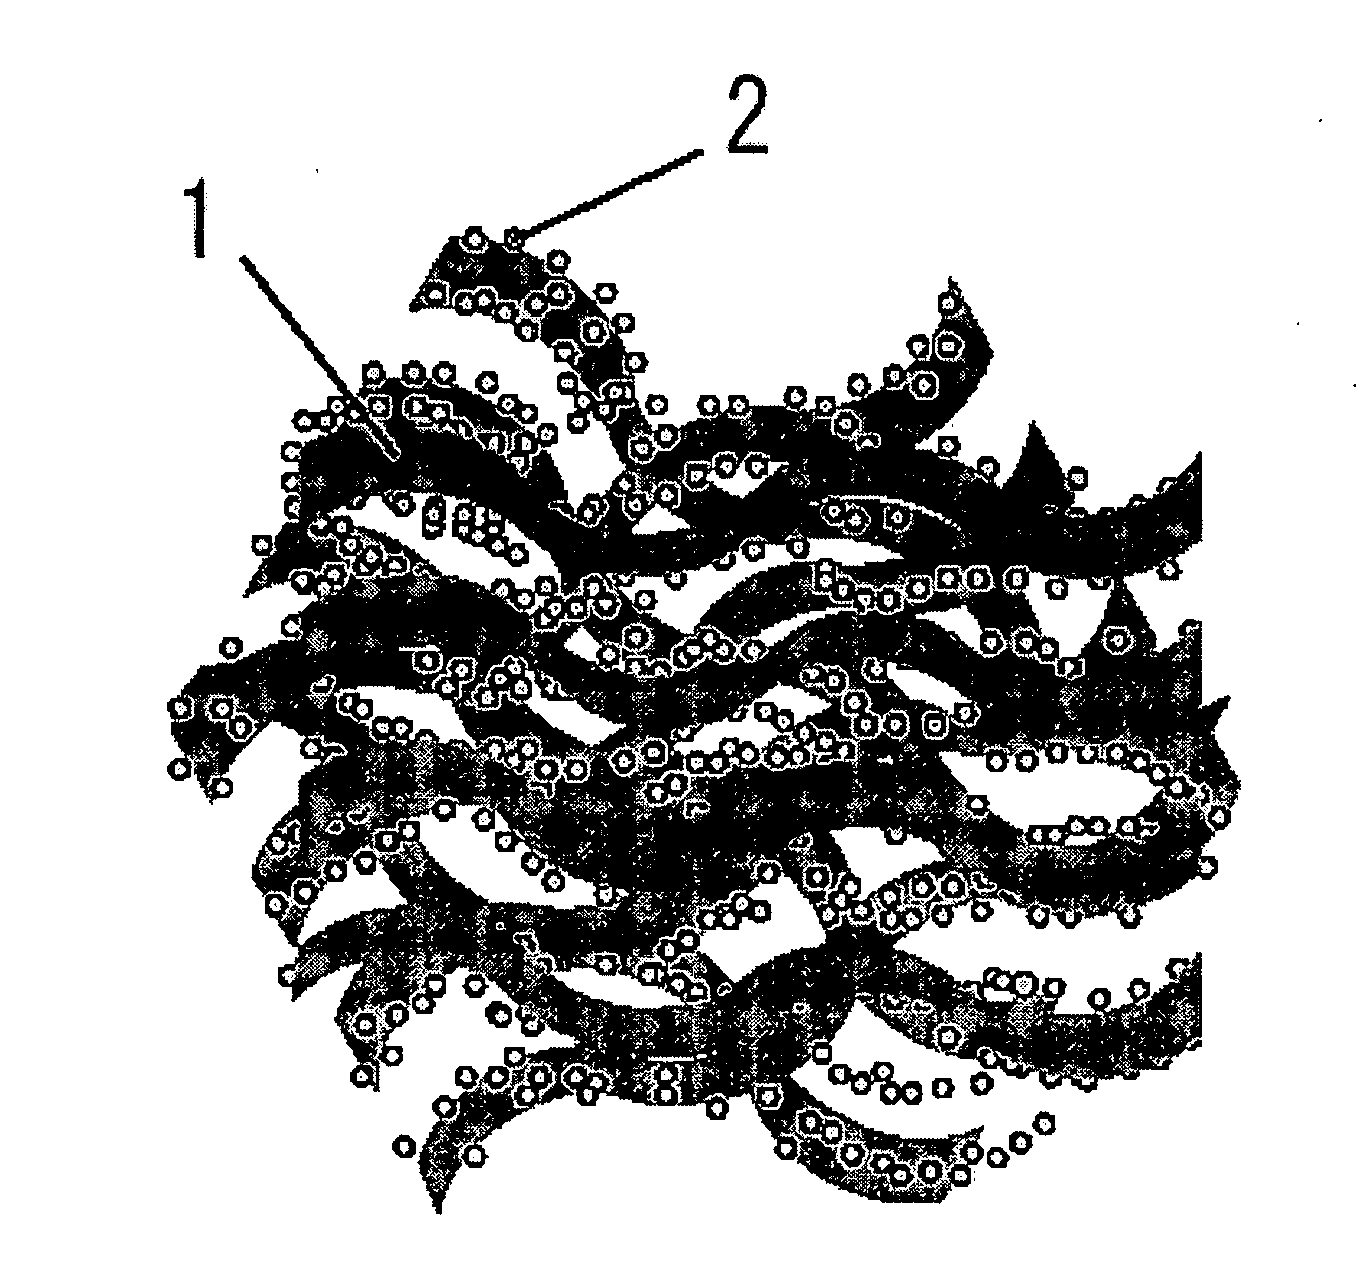 Electrode for use in oxygen reduction